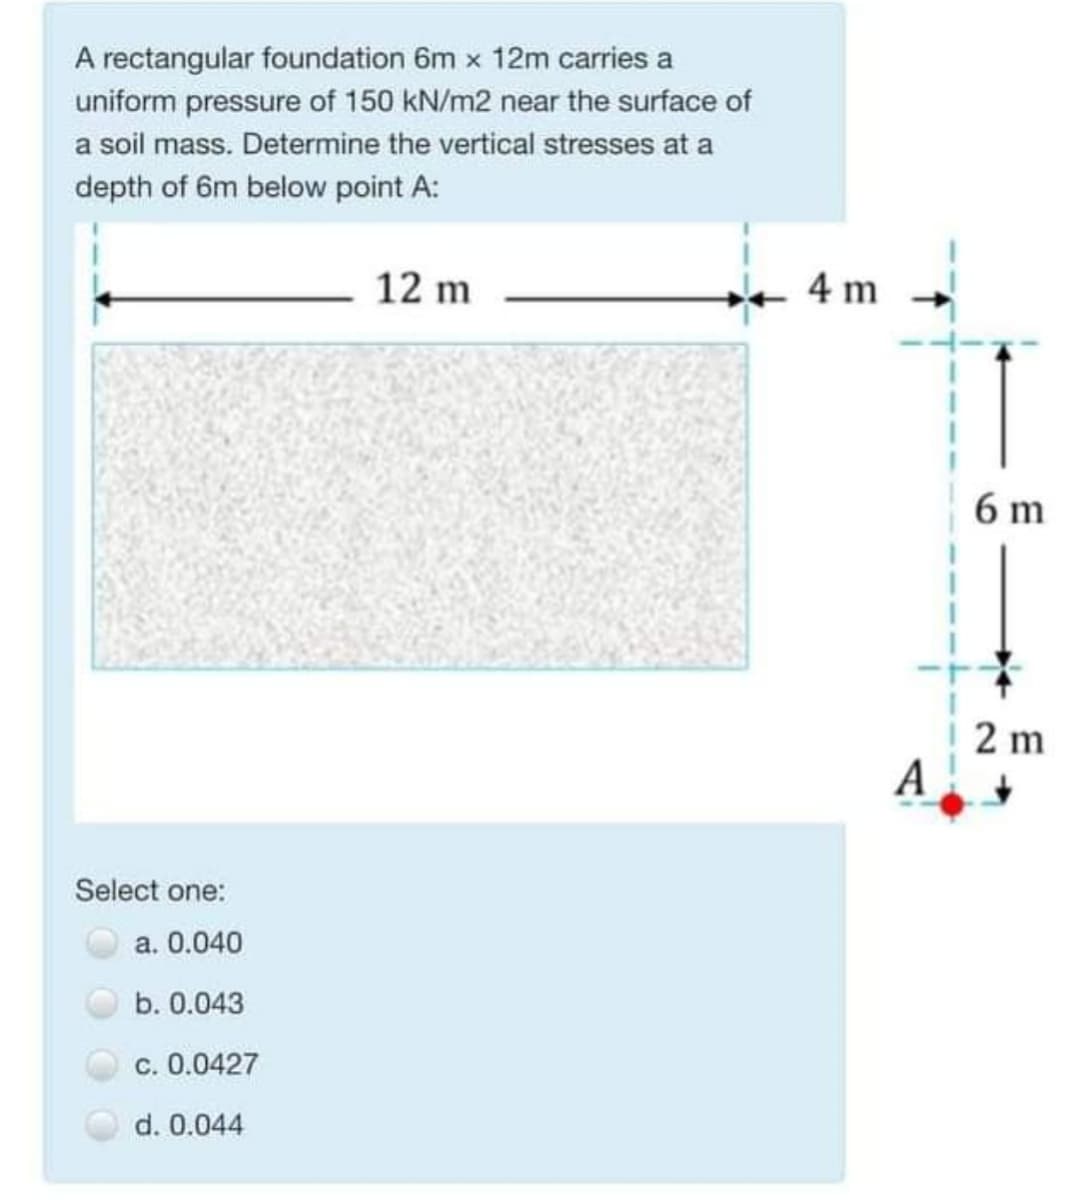 A rectangular foundation 6m x 12m carries a
uniform pressure of 150 kN/m2 near the surface of
a soil mass. Determine the vertical stresses at a
depth of 6m below point A:
12 m
4 m
6 m
2 m
A
Select one:
a. 0.040
b. 0.043
c. 0.0427
d. 0.044
